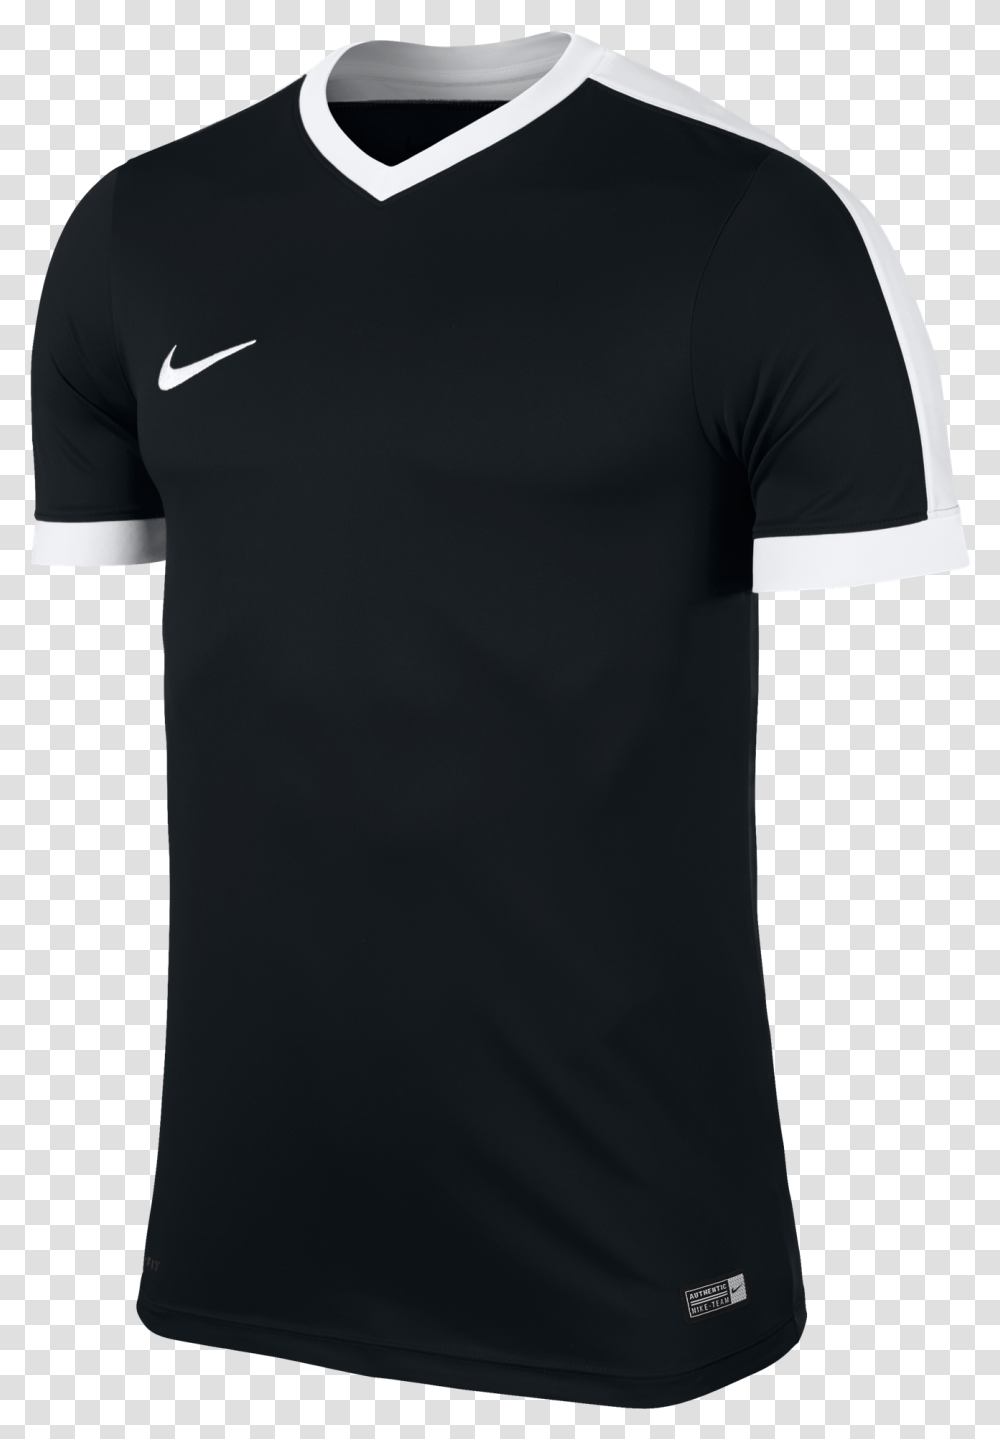 Football Jersey For Free Download, Clothing, Apparel, Sleeve, Shirt Transparent Png